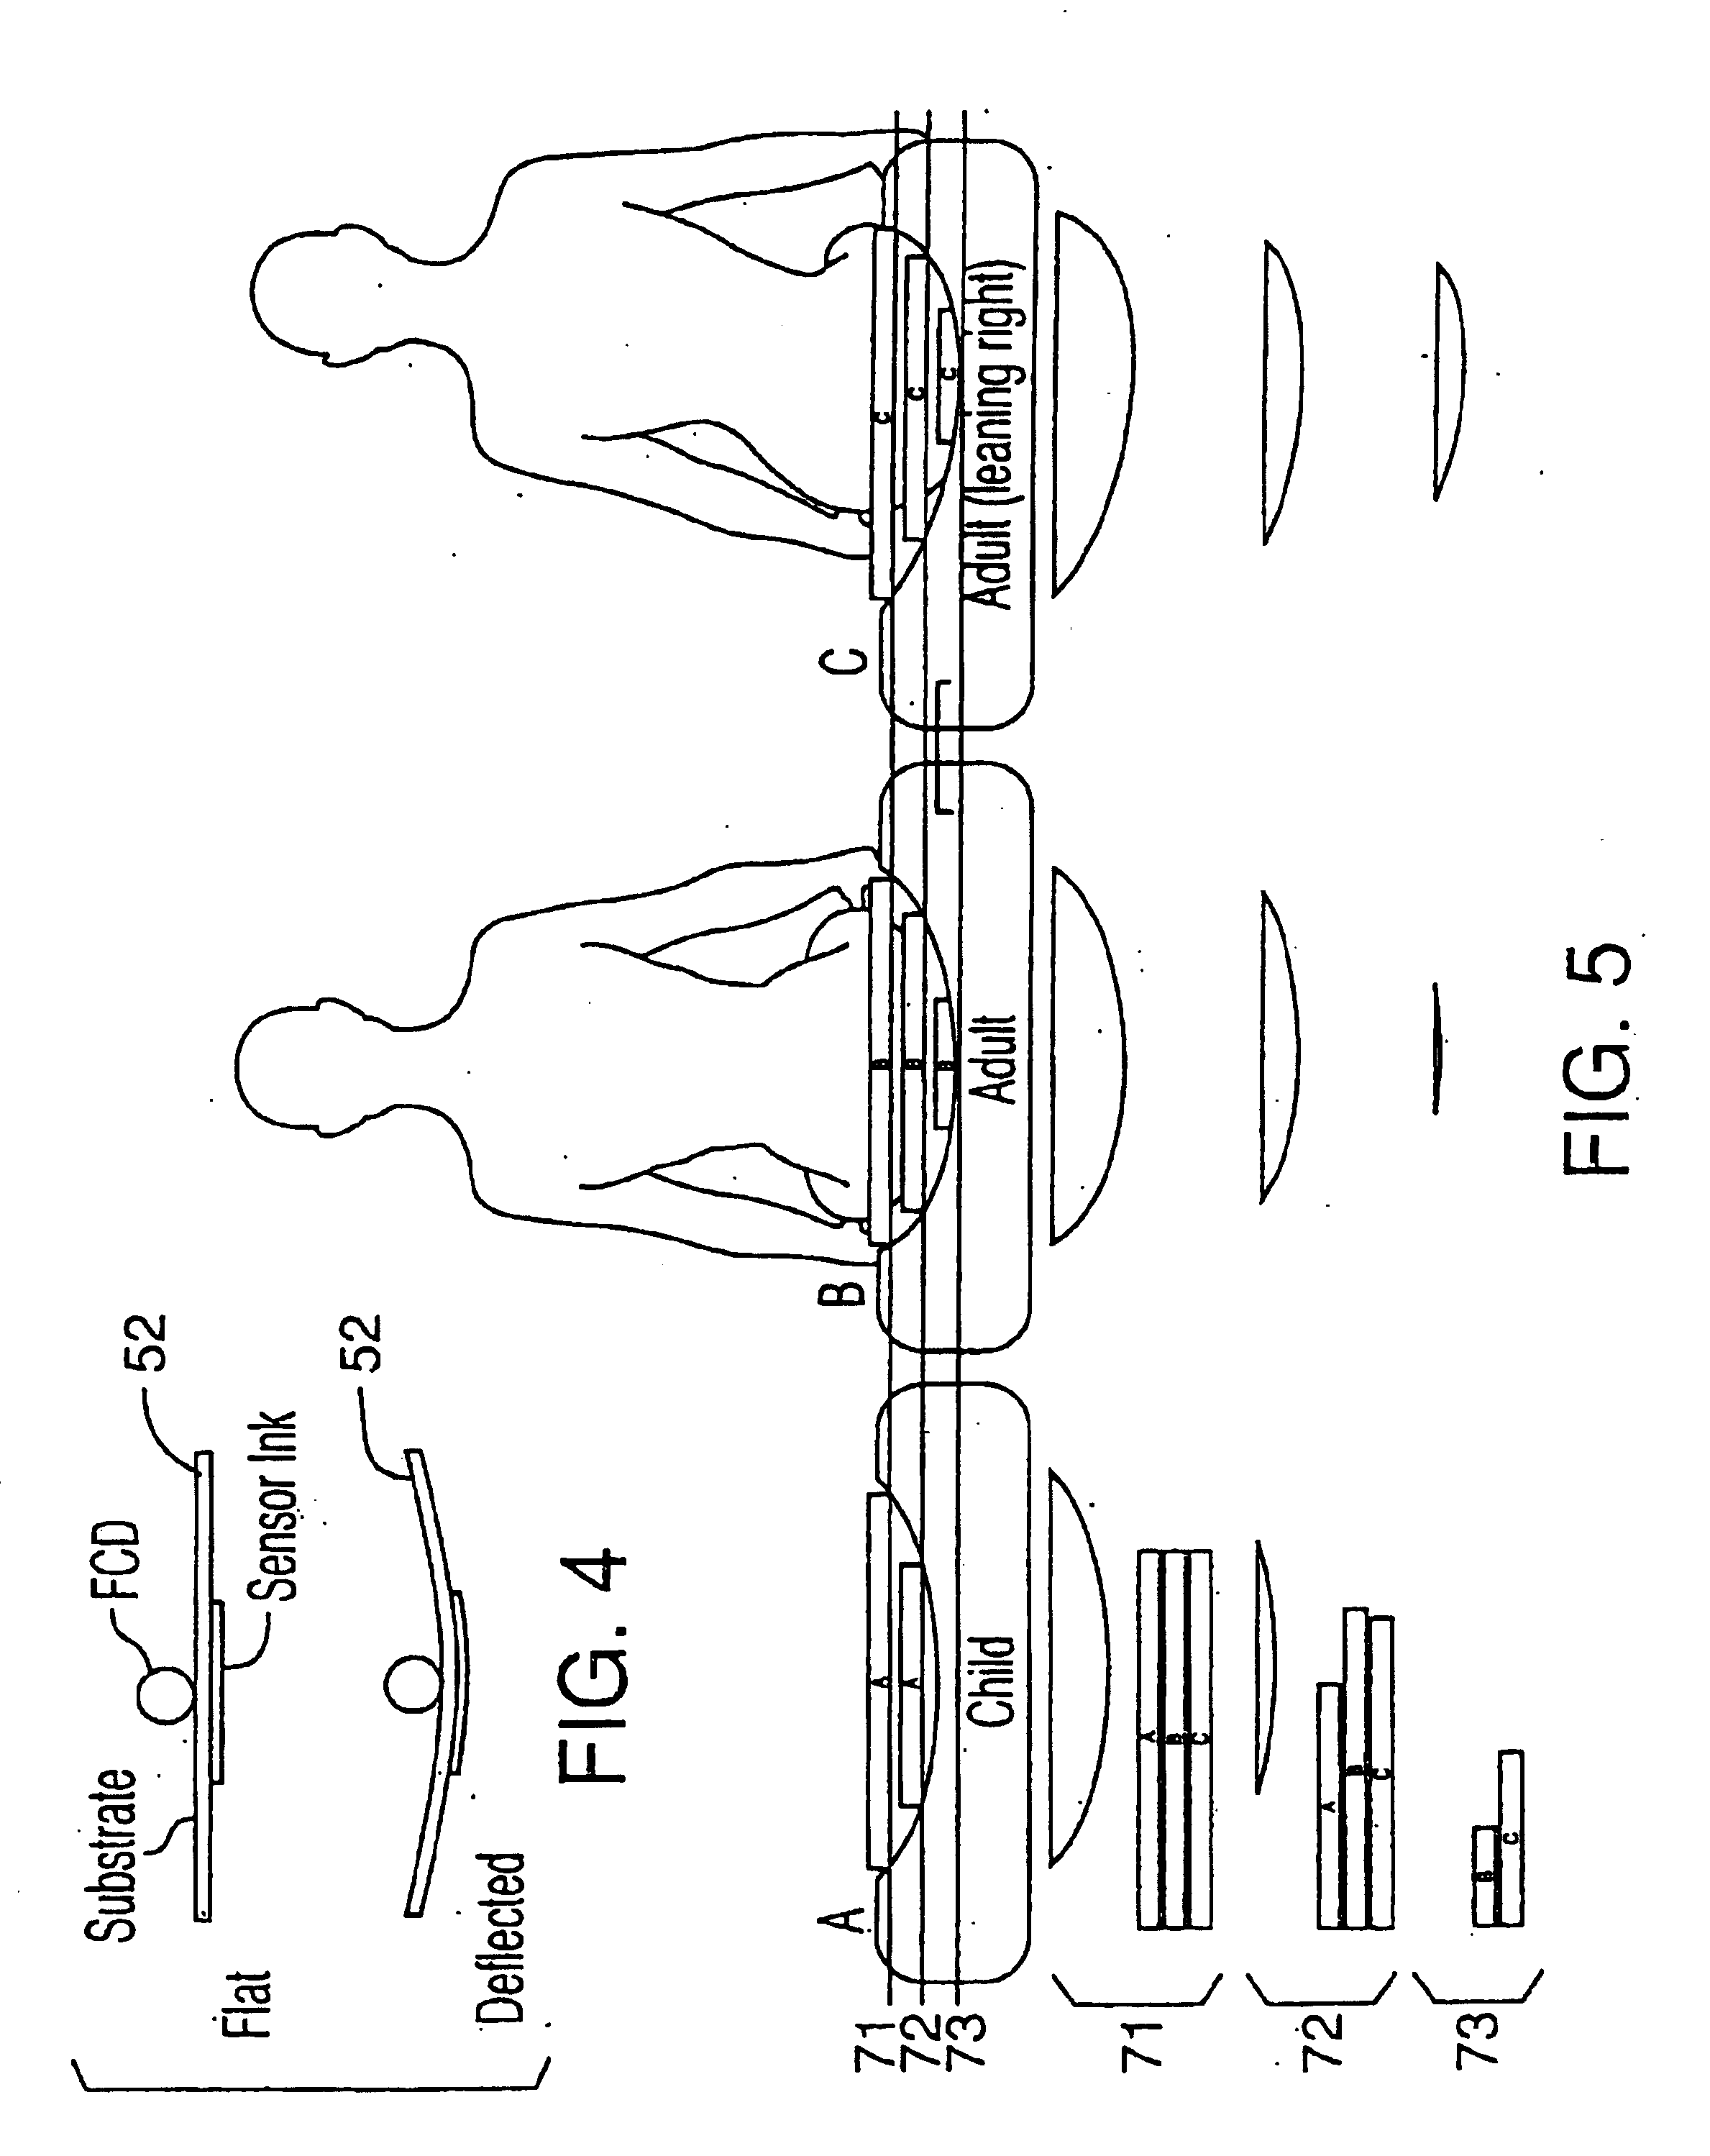 Vehicle occupant classification system and method